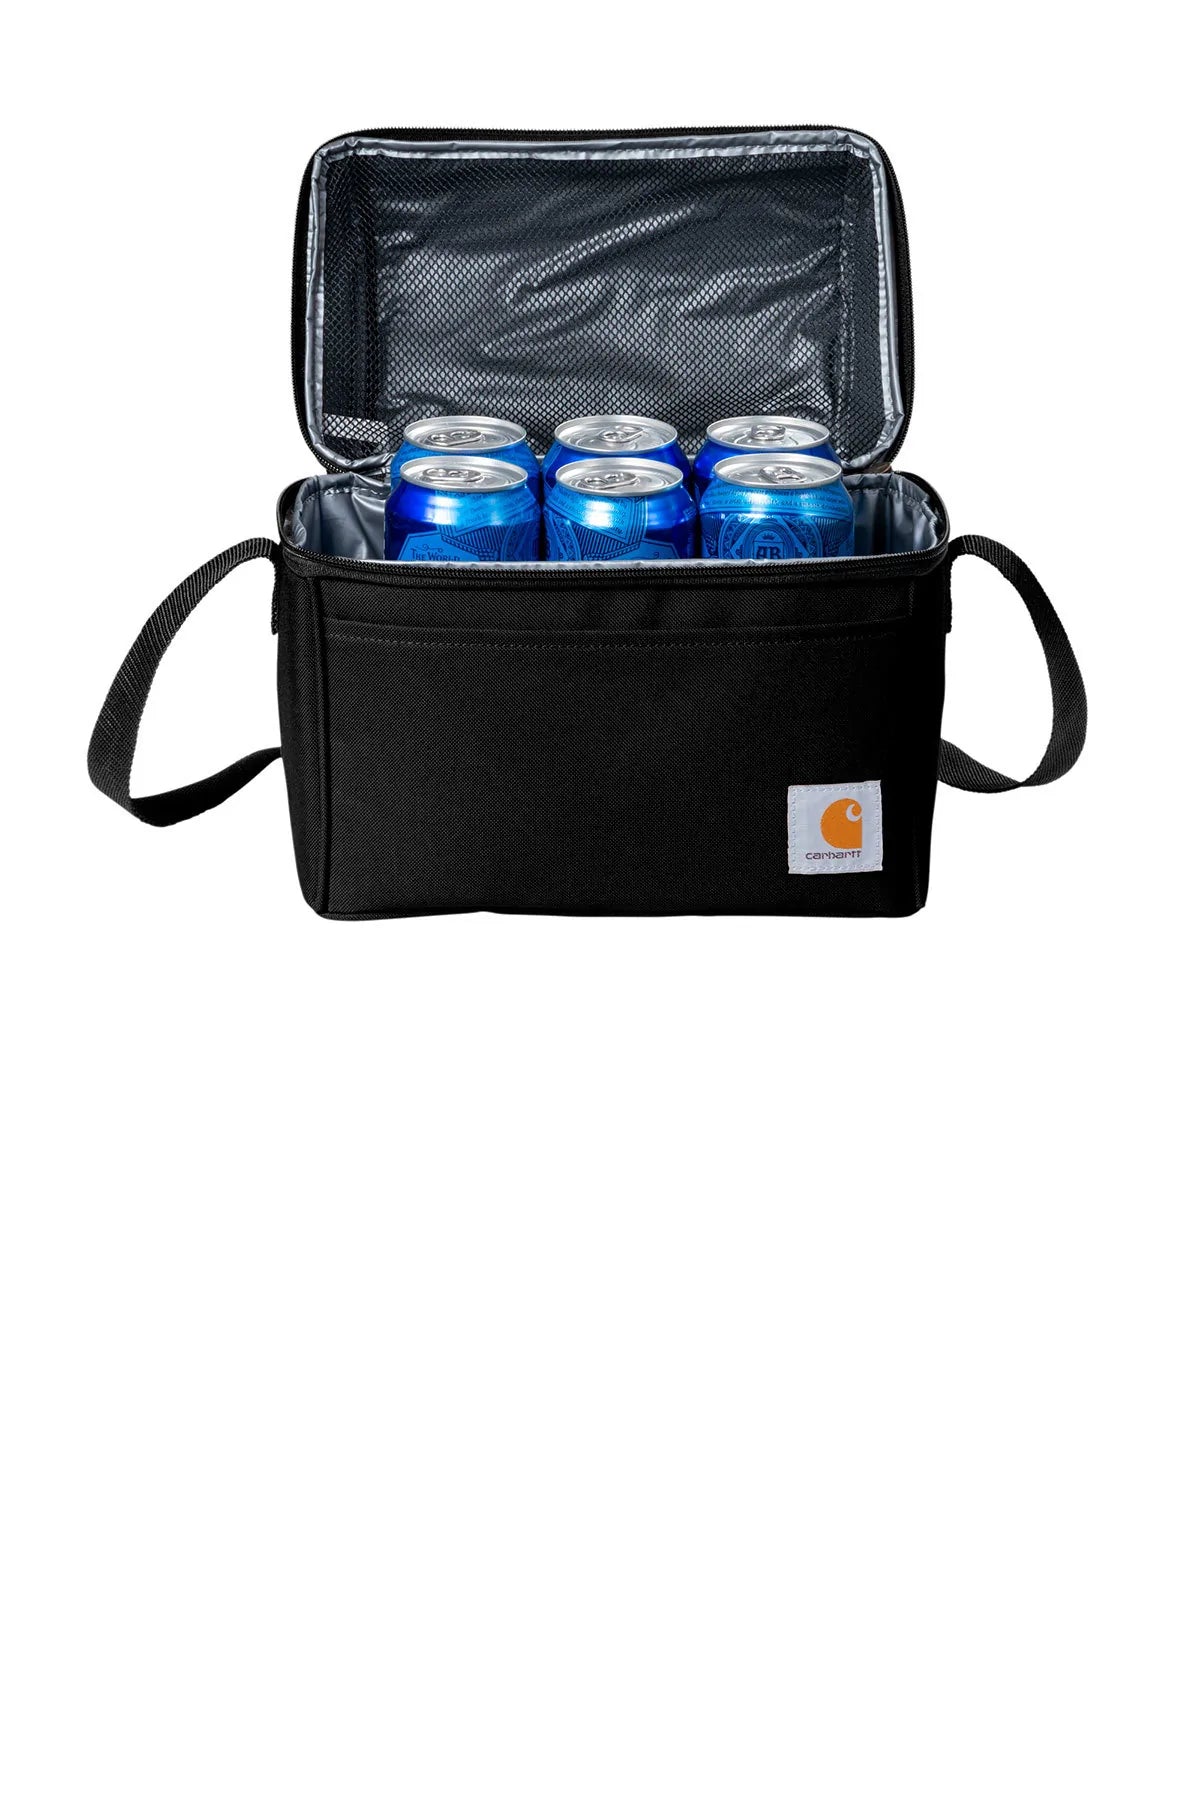 Carhartt Lunch 6-Can Customized Coolers, Black